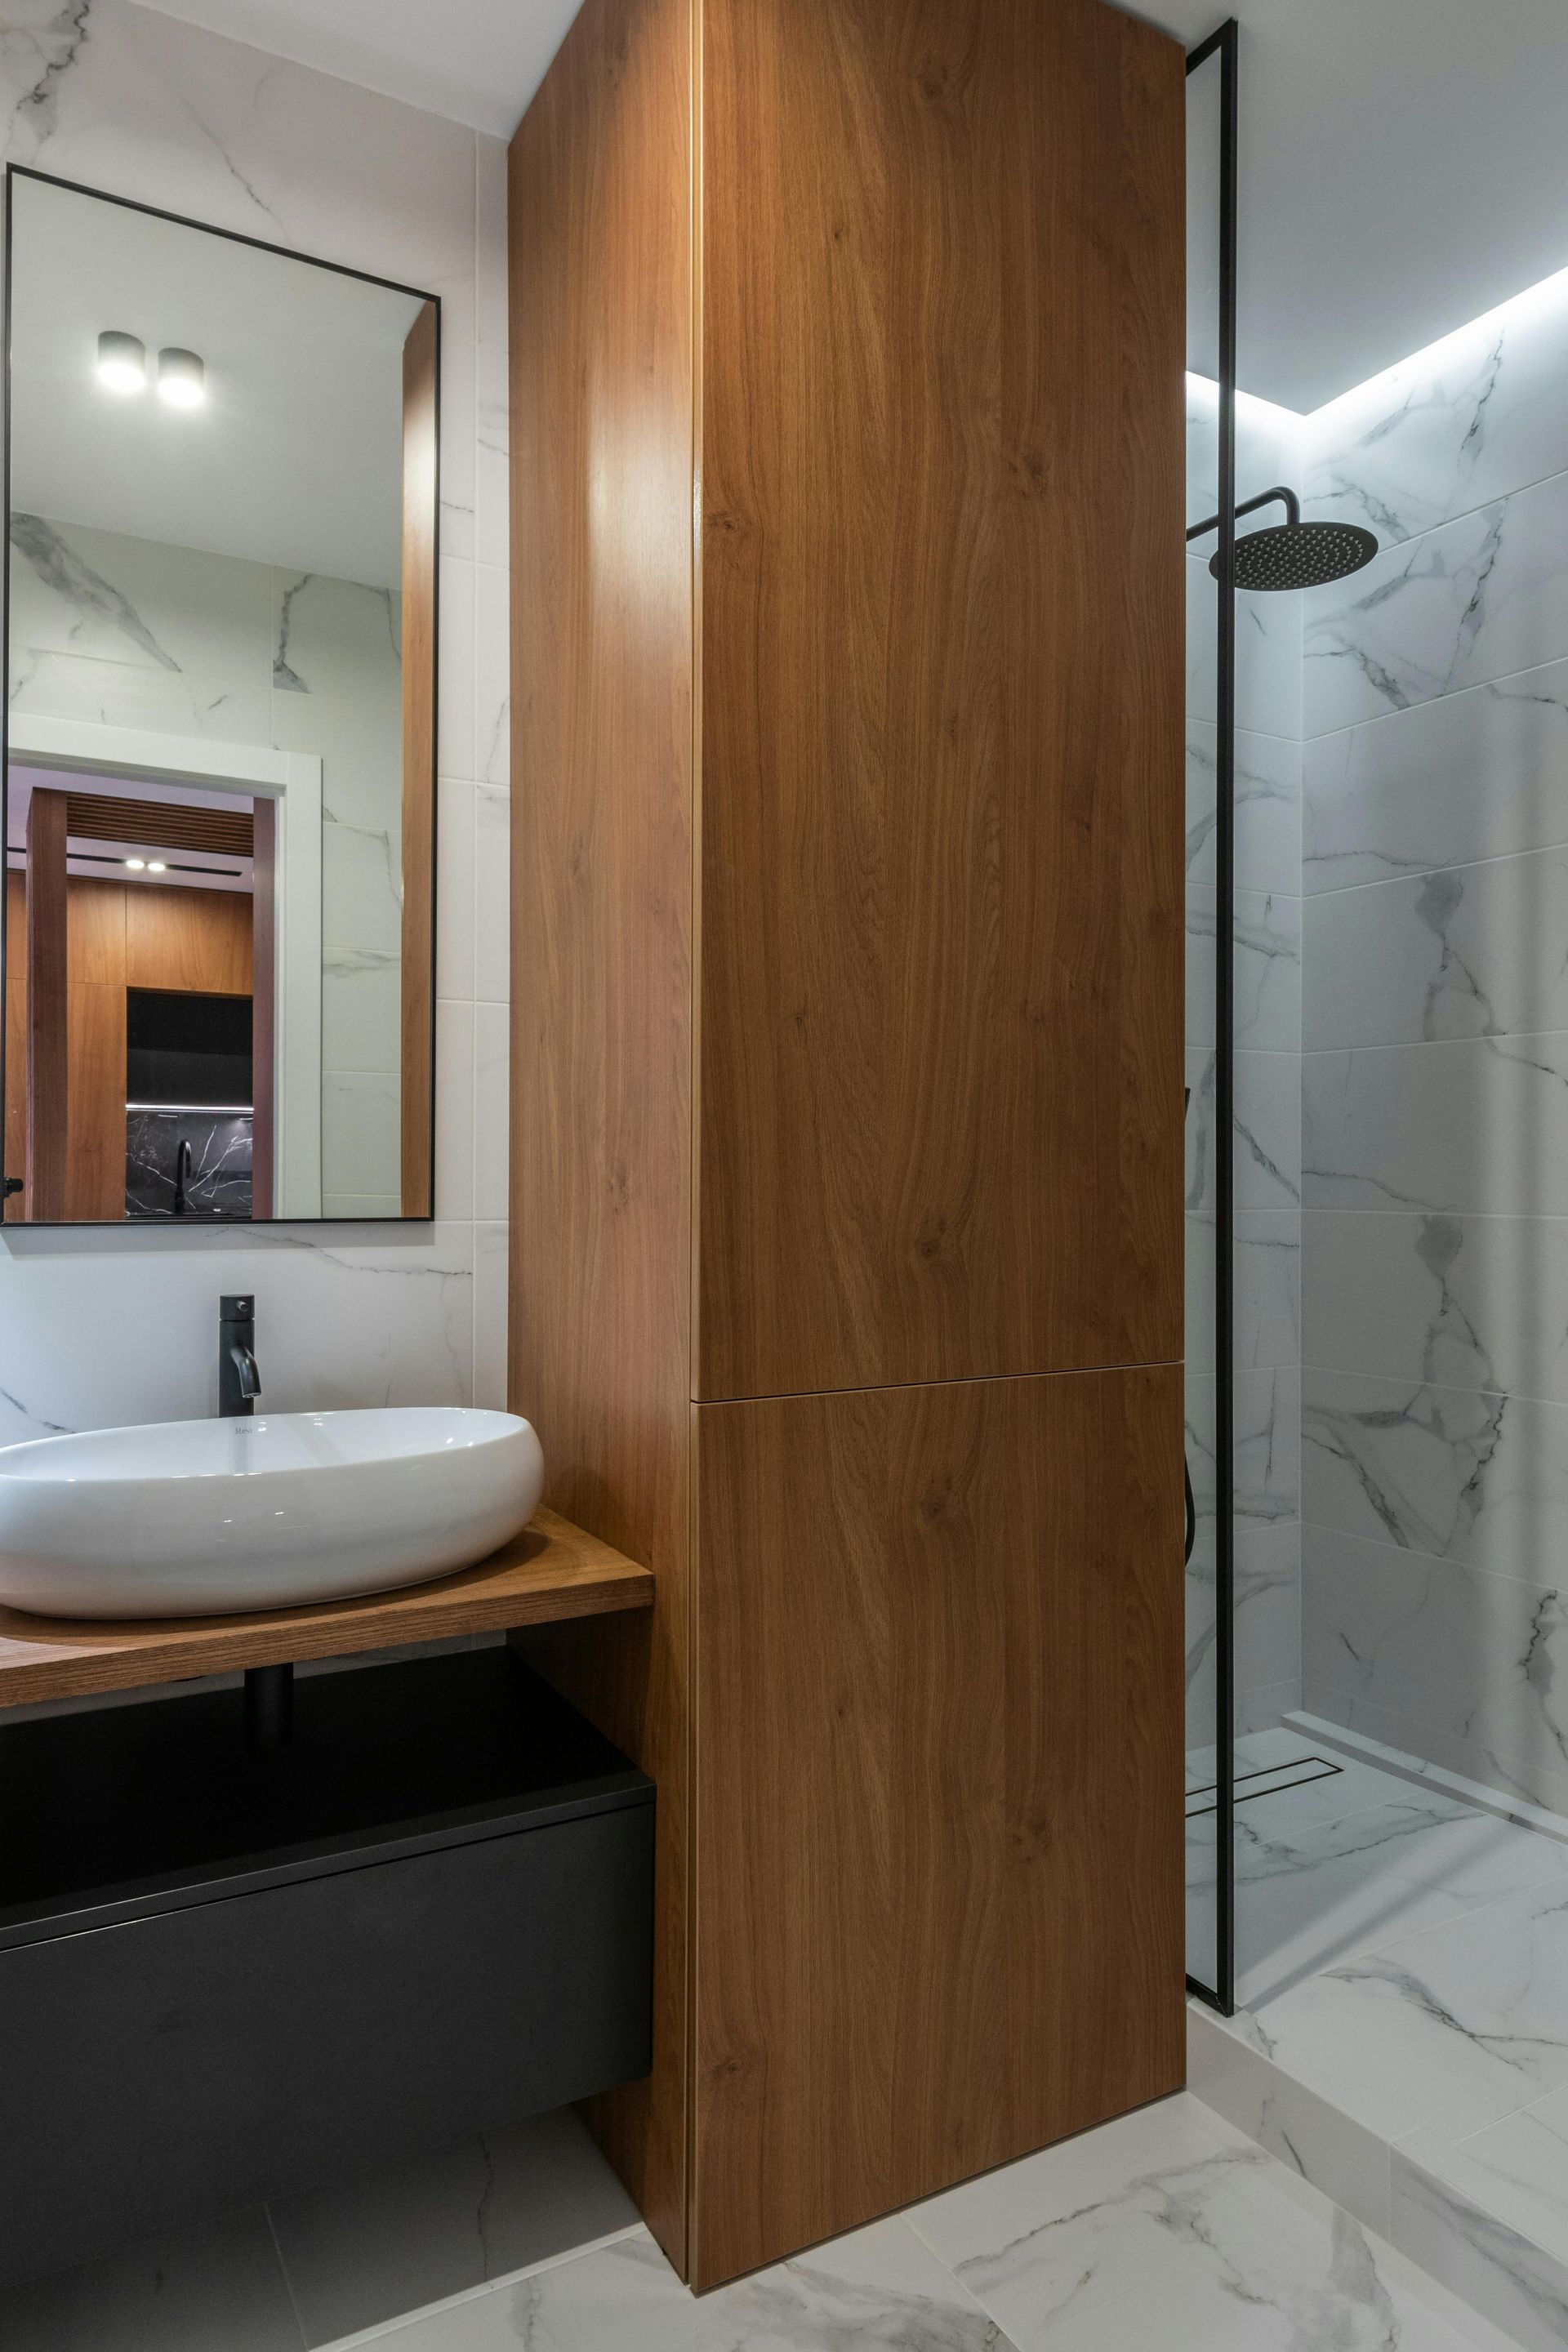 Wooden bathroom tiled with earthen tones in Swansea, SOuth Wales